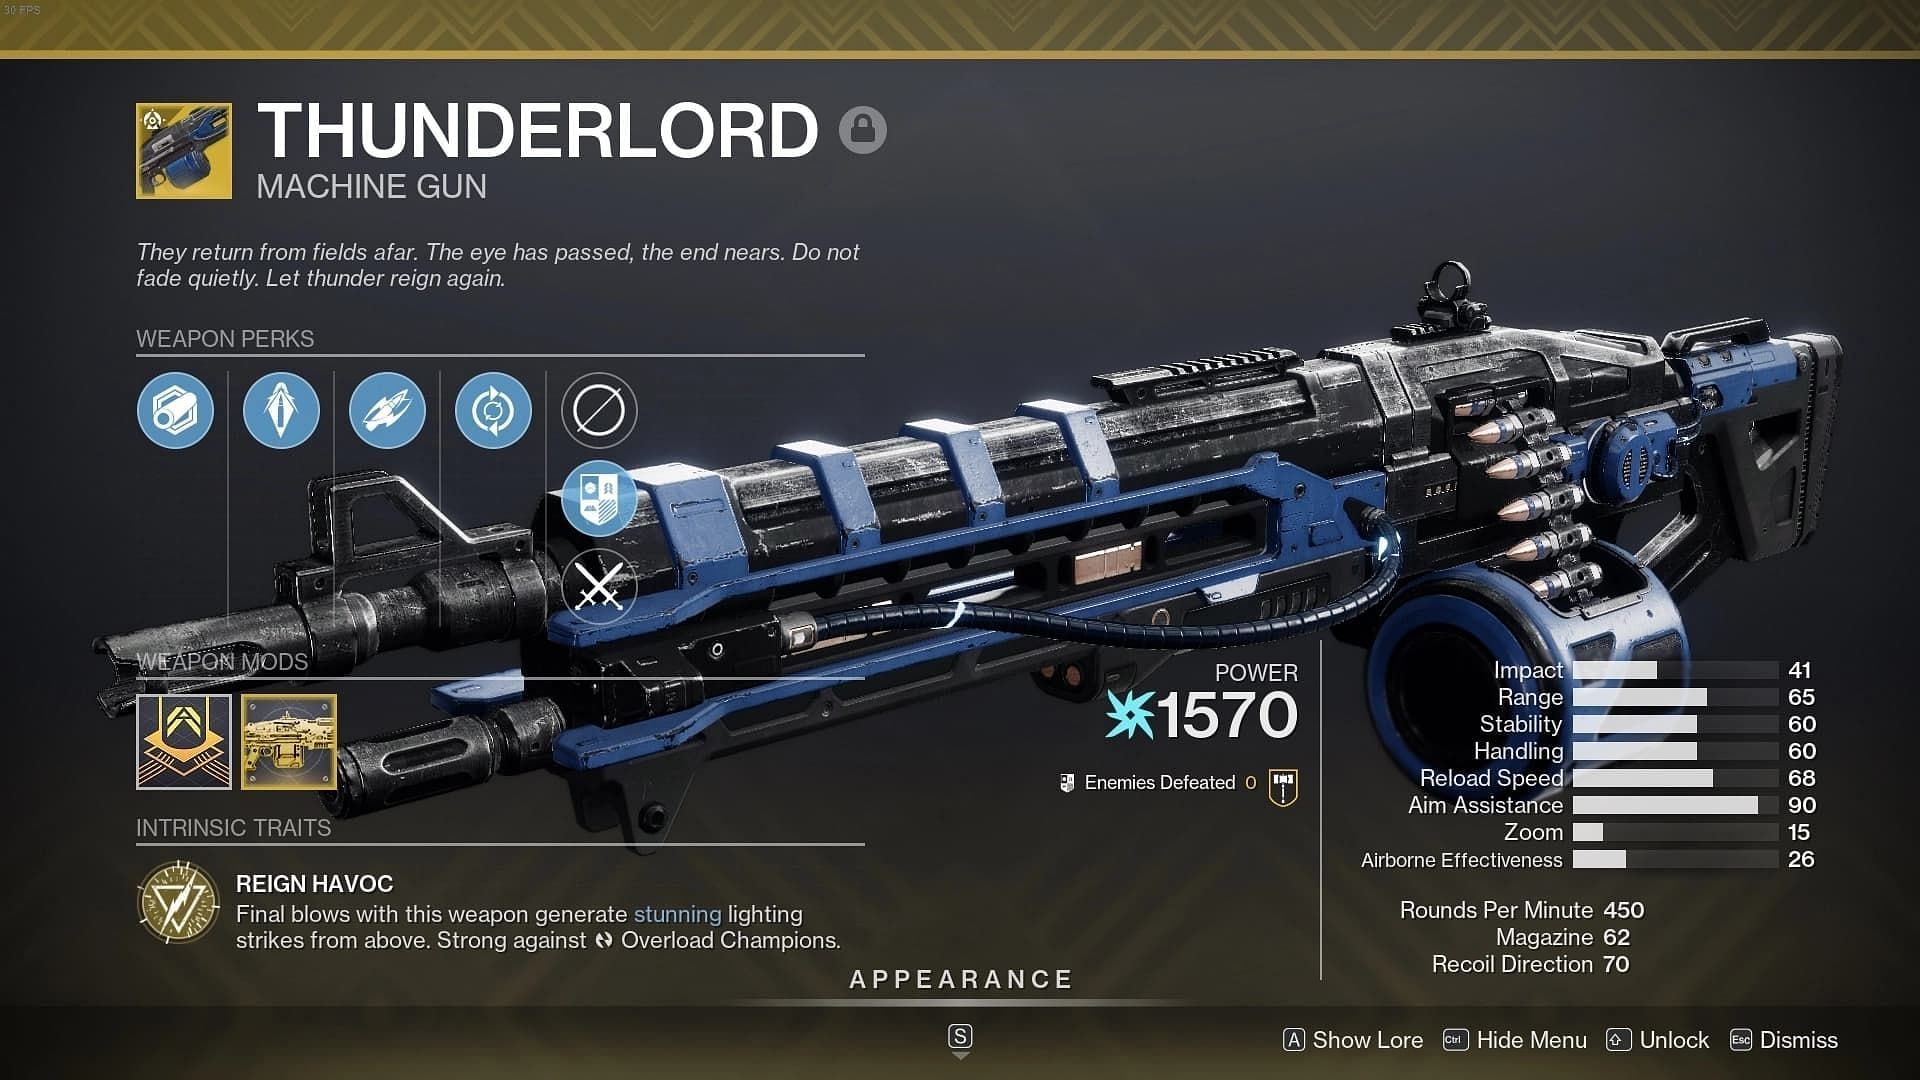 The Thunderlord is an extremely powerful LMG in Destiny 2 (Image via Bungie)